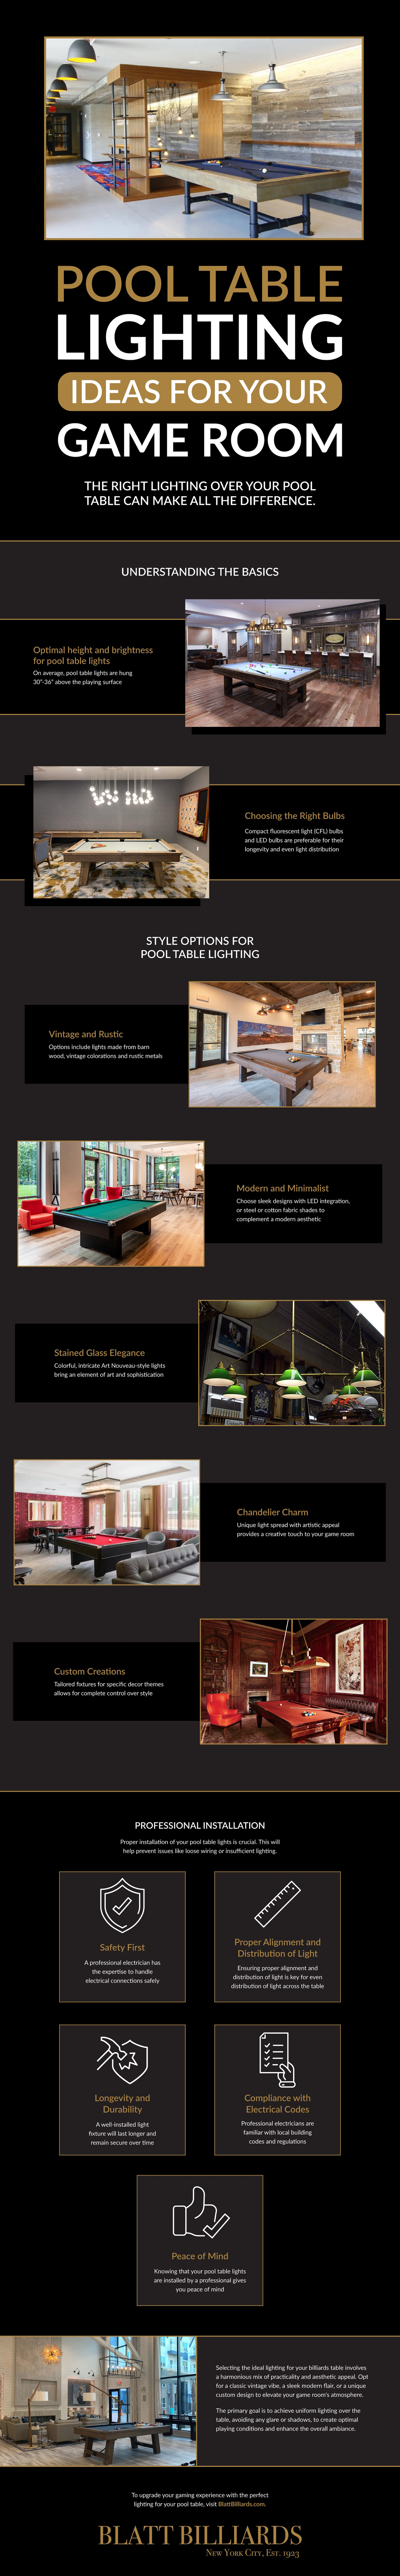 Pool Table Lighting Ideas for Your Game Room